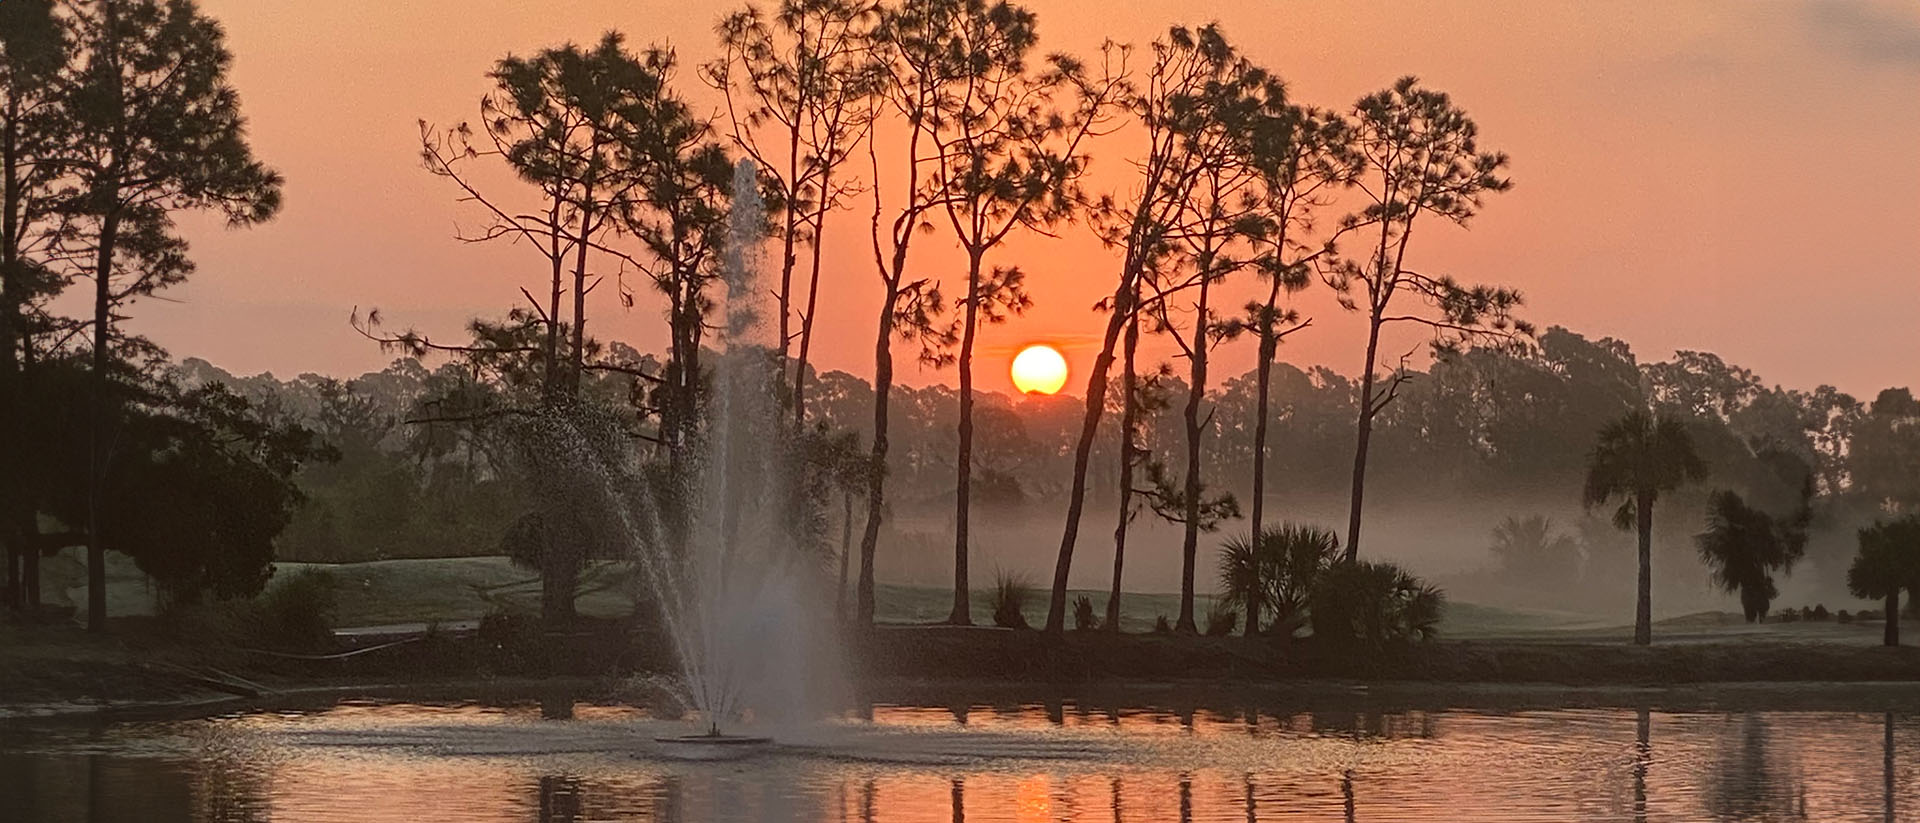 sun sinking behind Slash Pines with fountain in the foreground